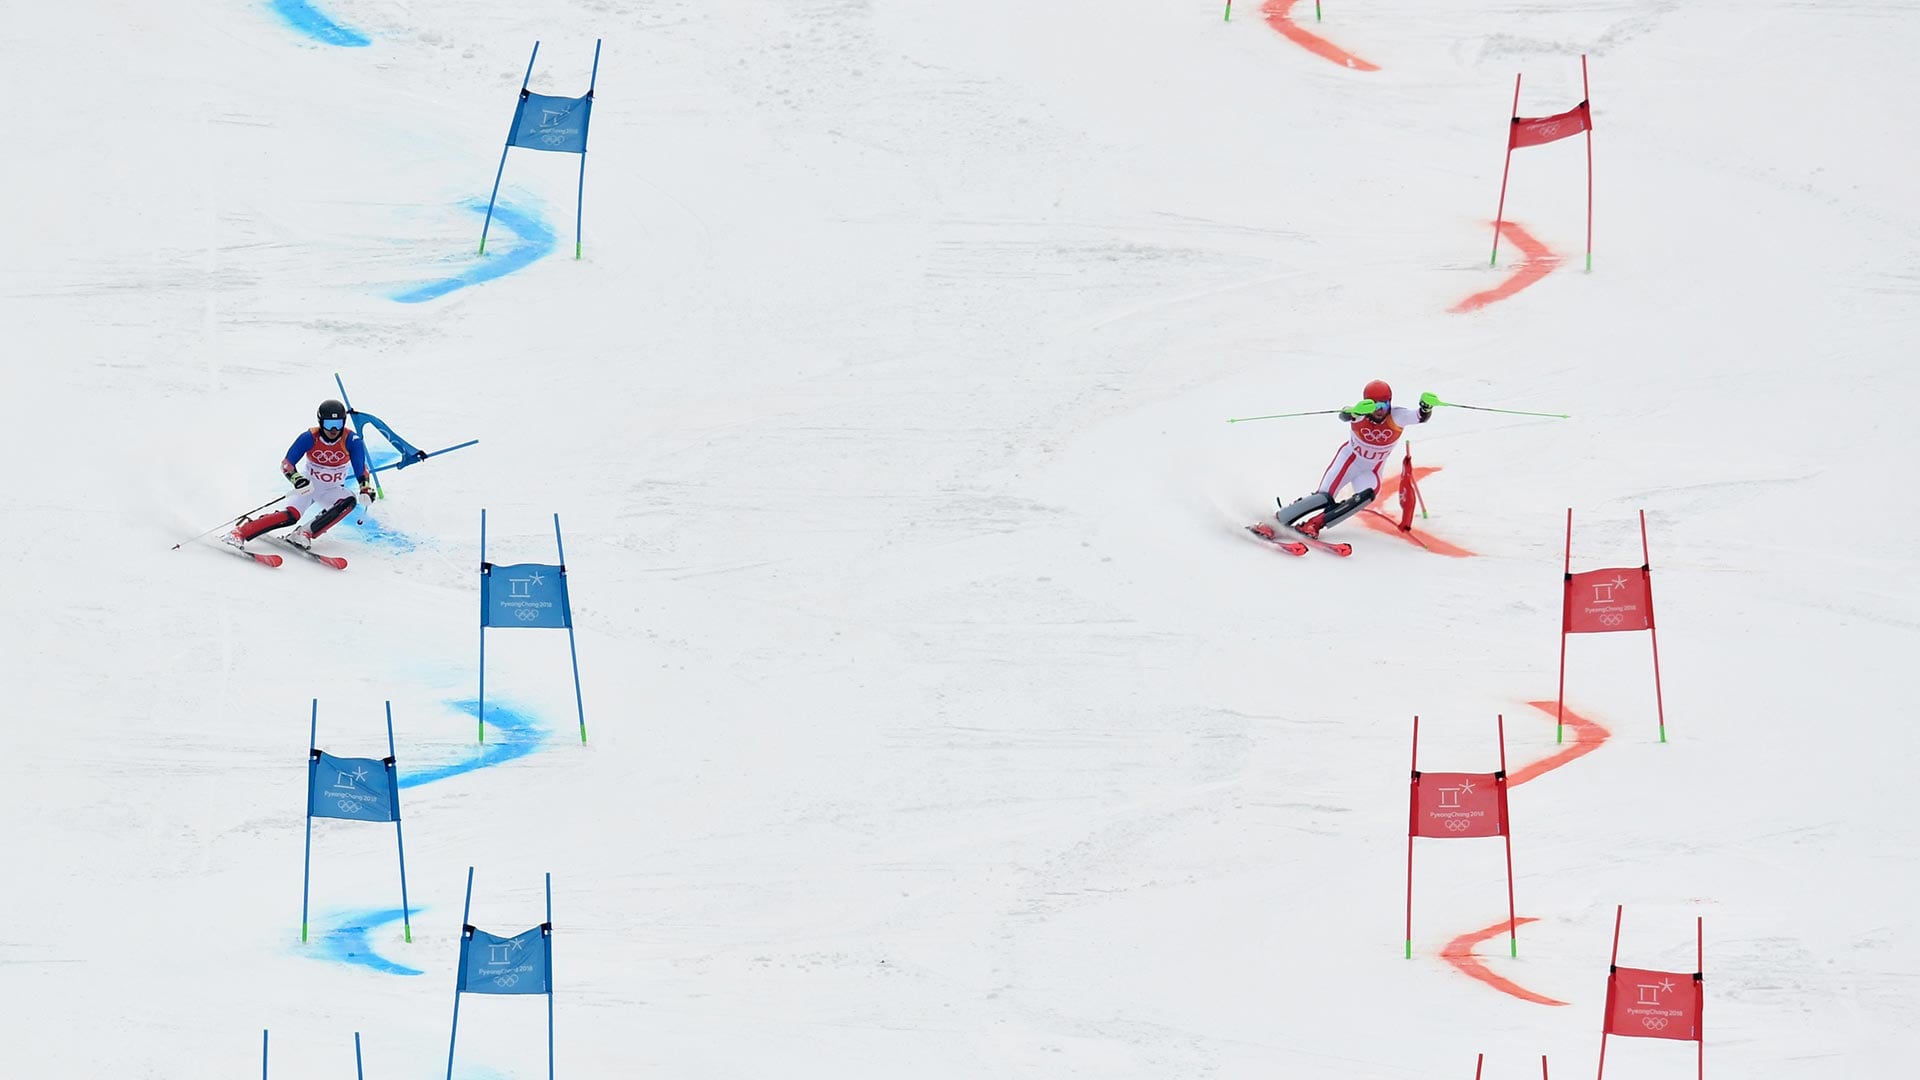 alpine skiing at the 2022 winter olympics – mixed team